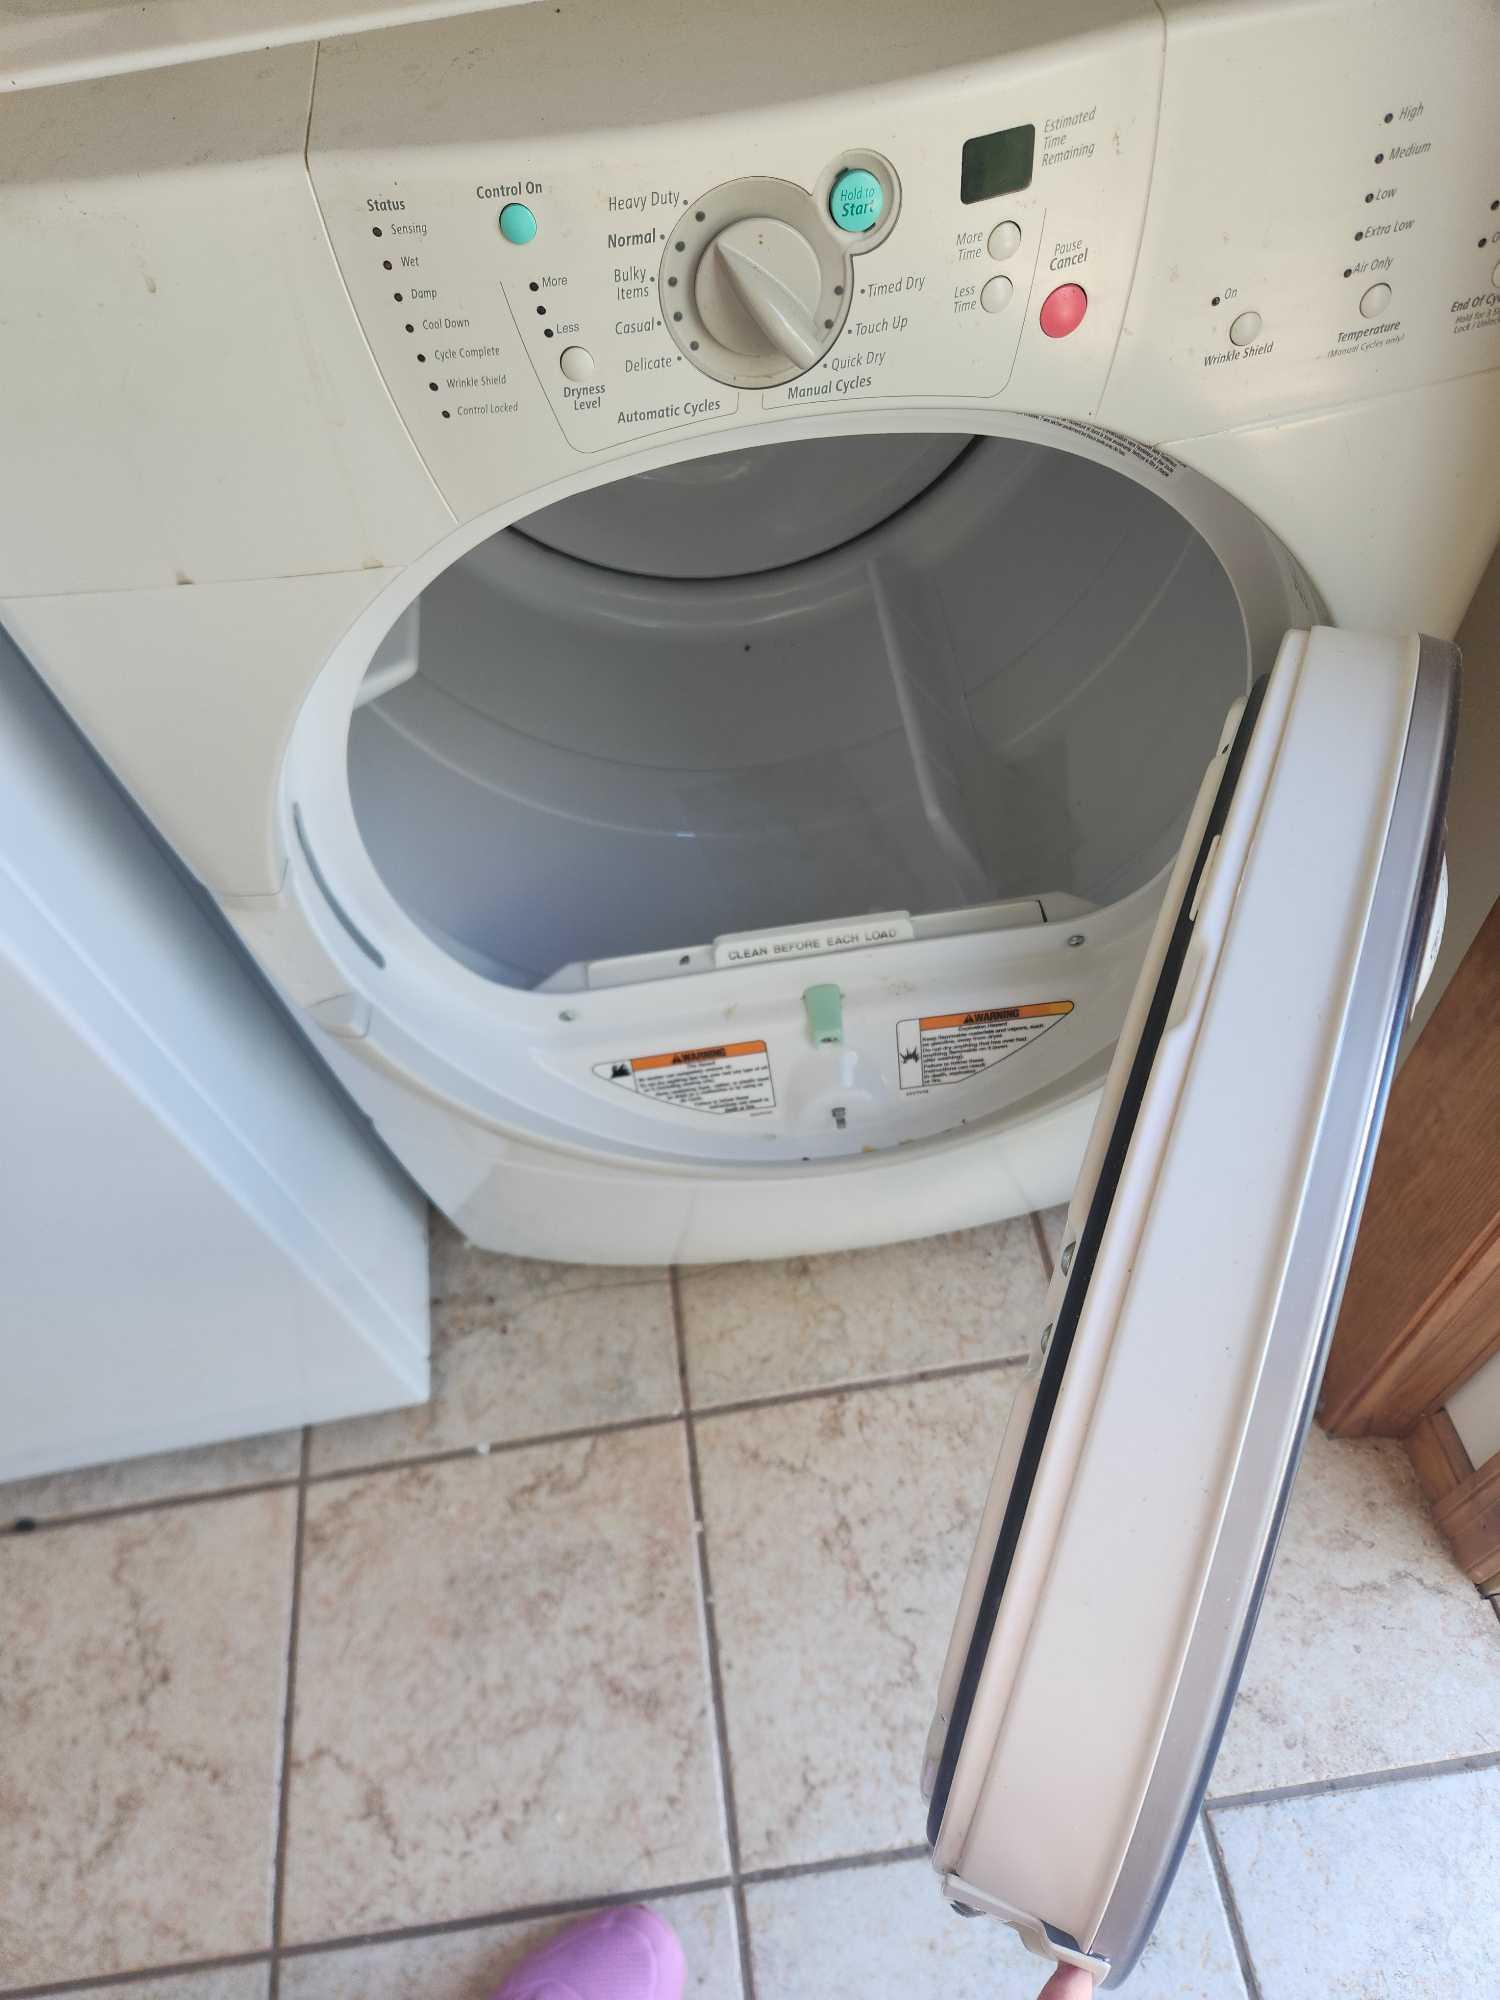 GE Washer, Whirlpool Electric Dryer, and Contents